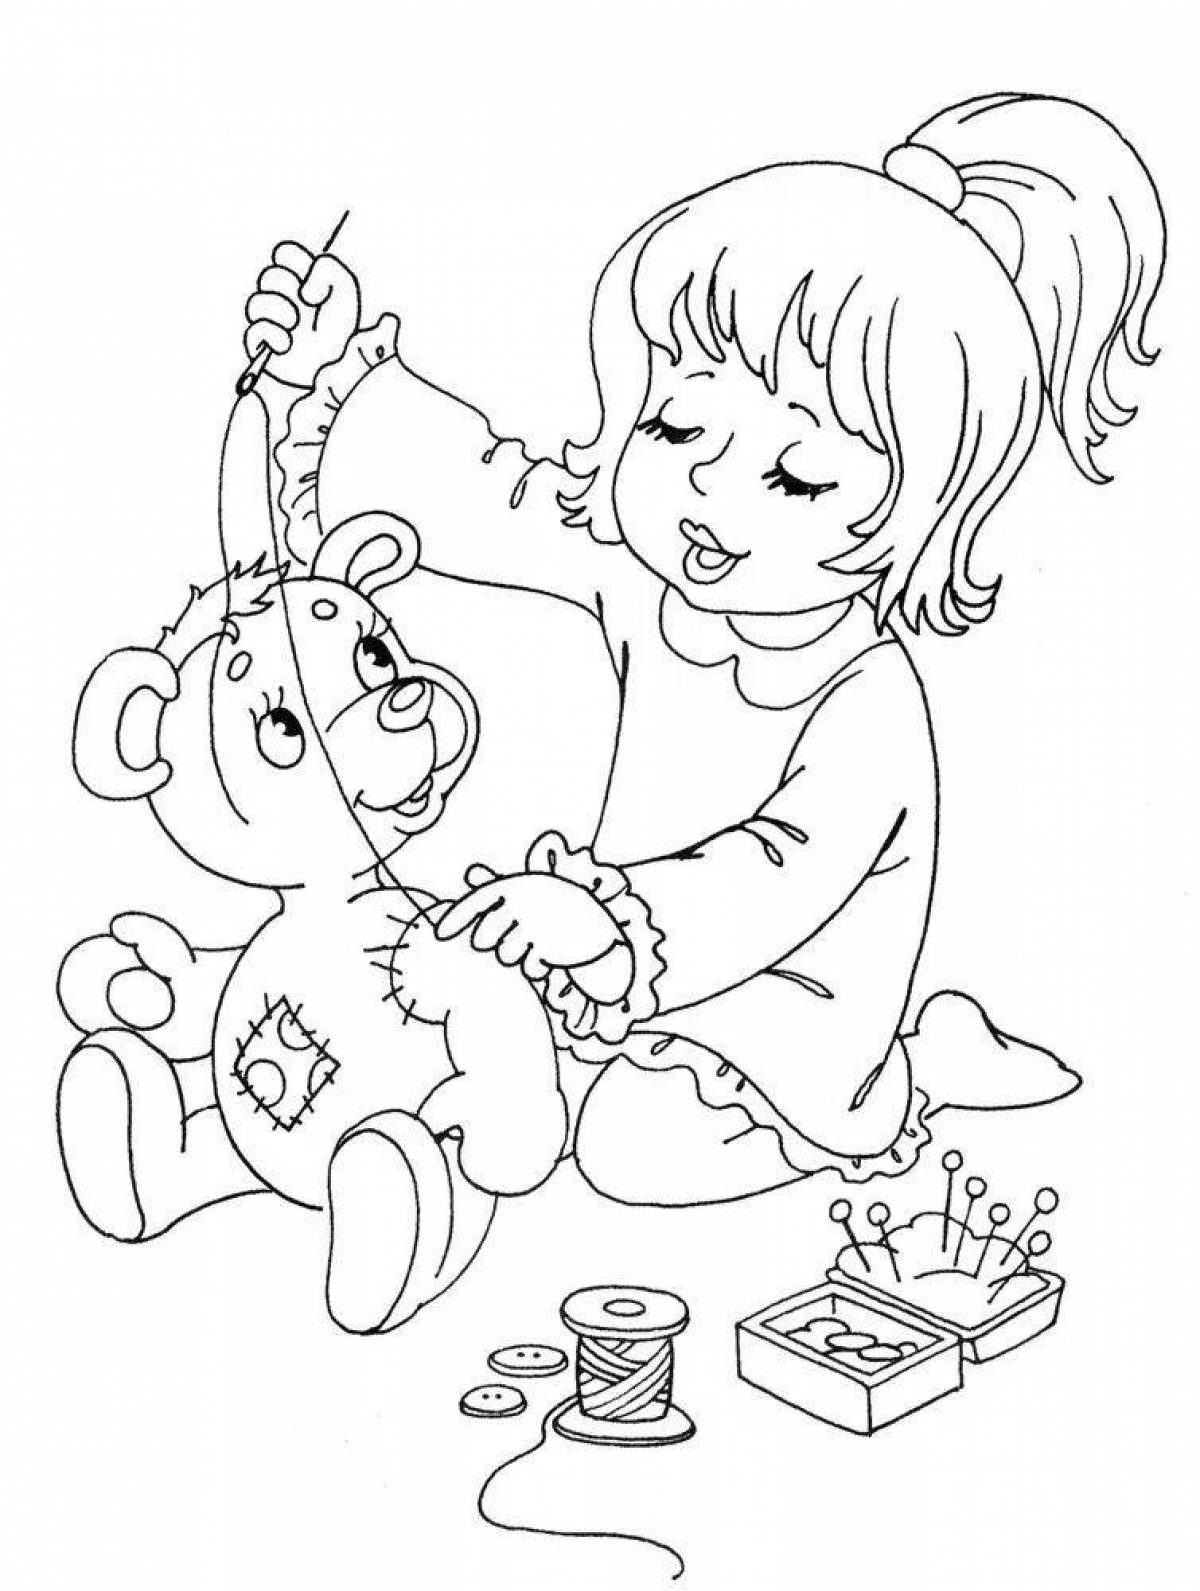 Coloring page encouraging good deeds